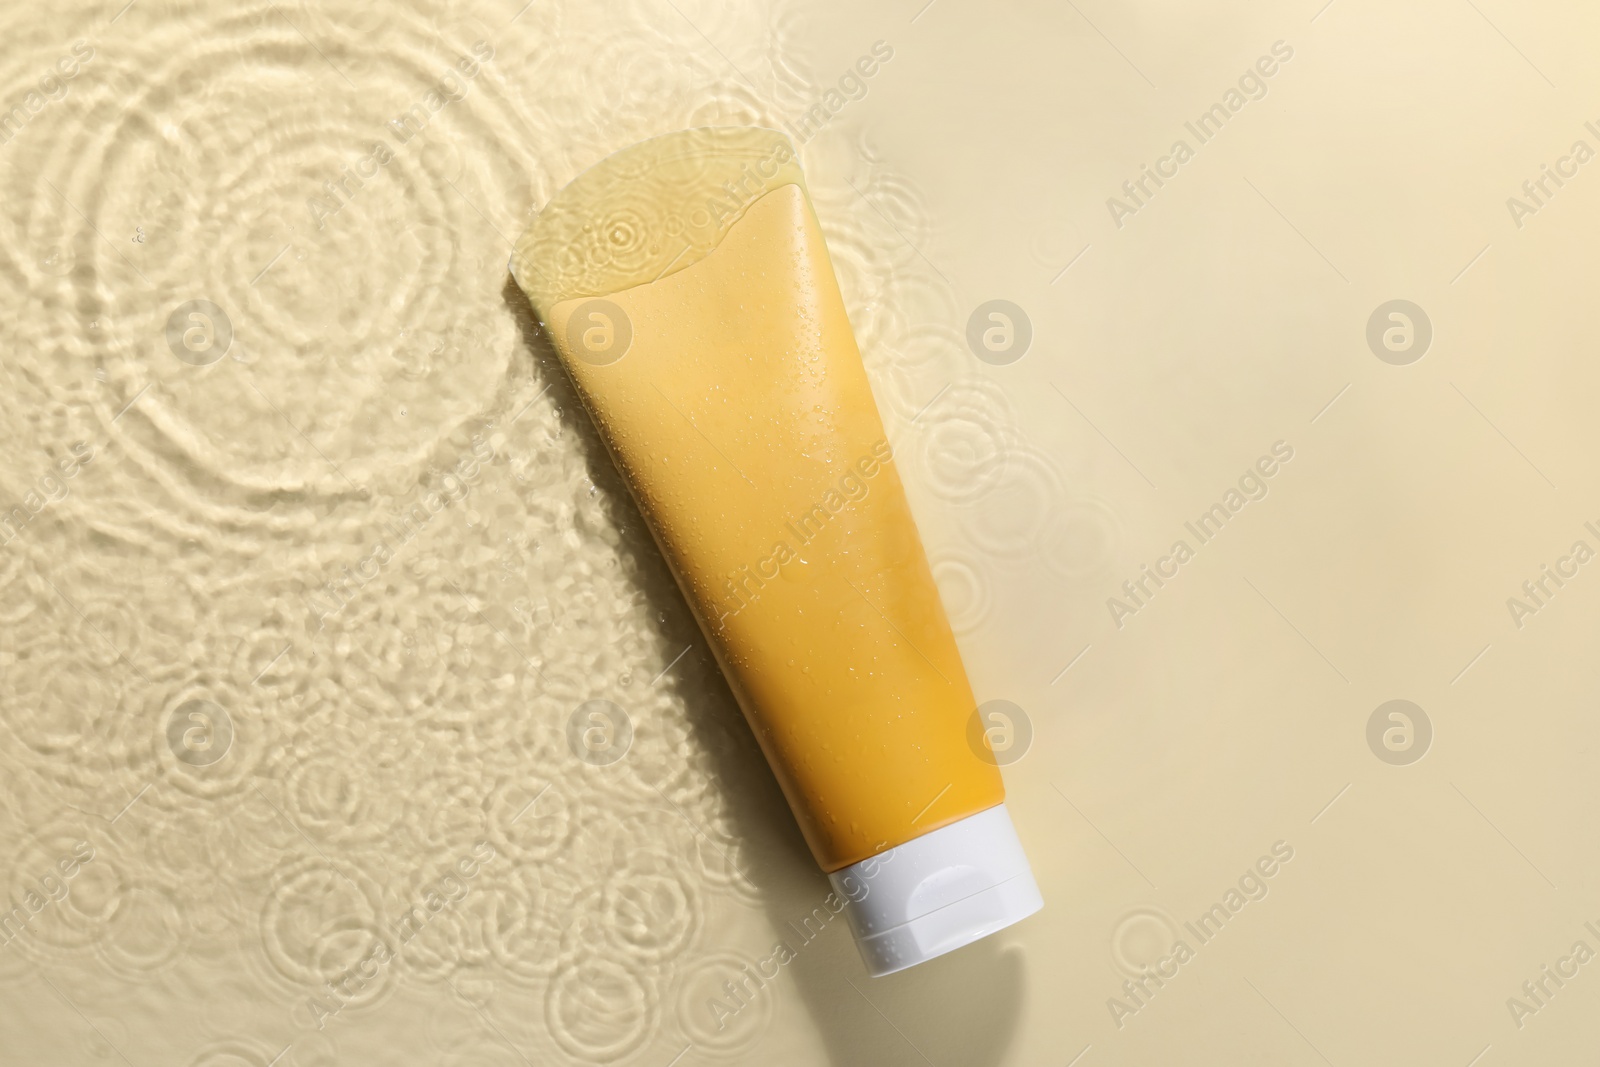 Photo of Tube of face cleansing product in water against beige background, top view